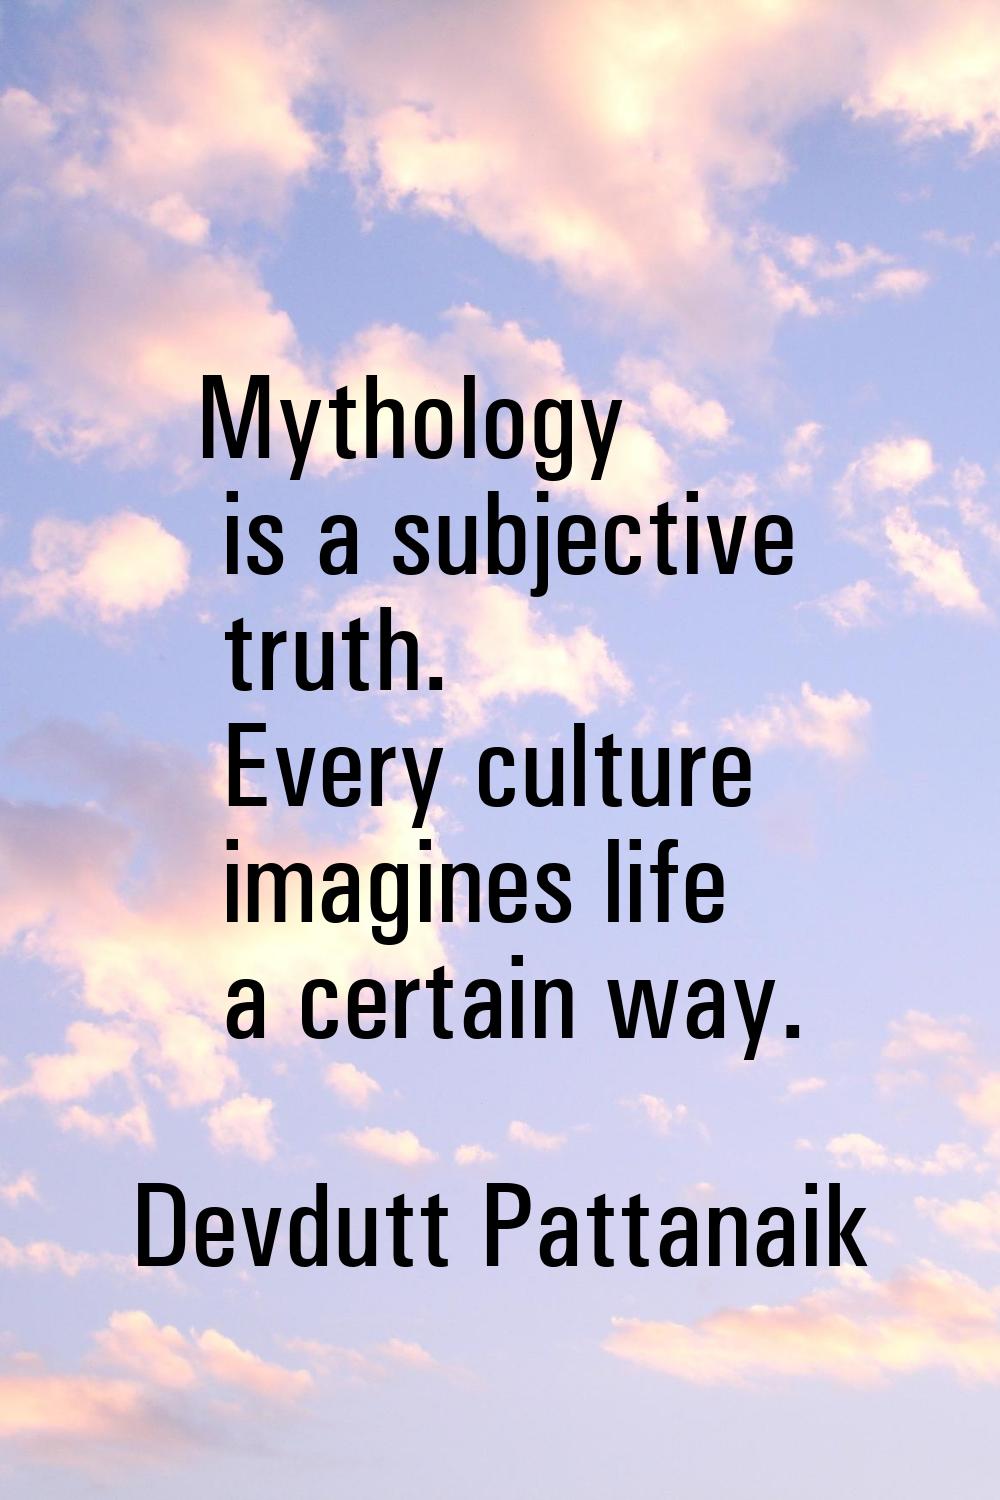 Mythology is a subjective truth. Every culture imagines life a certain way.